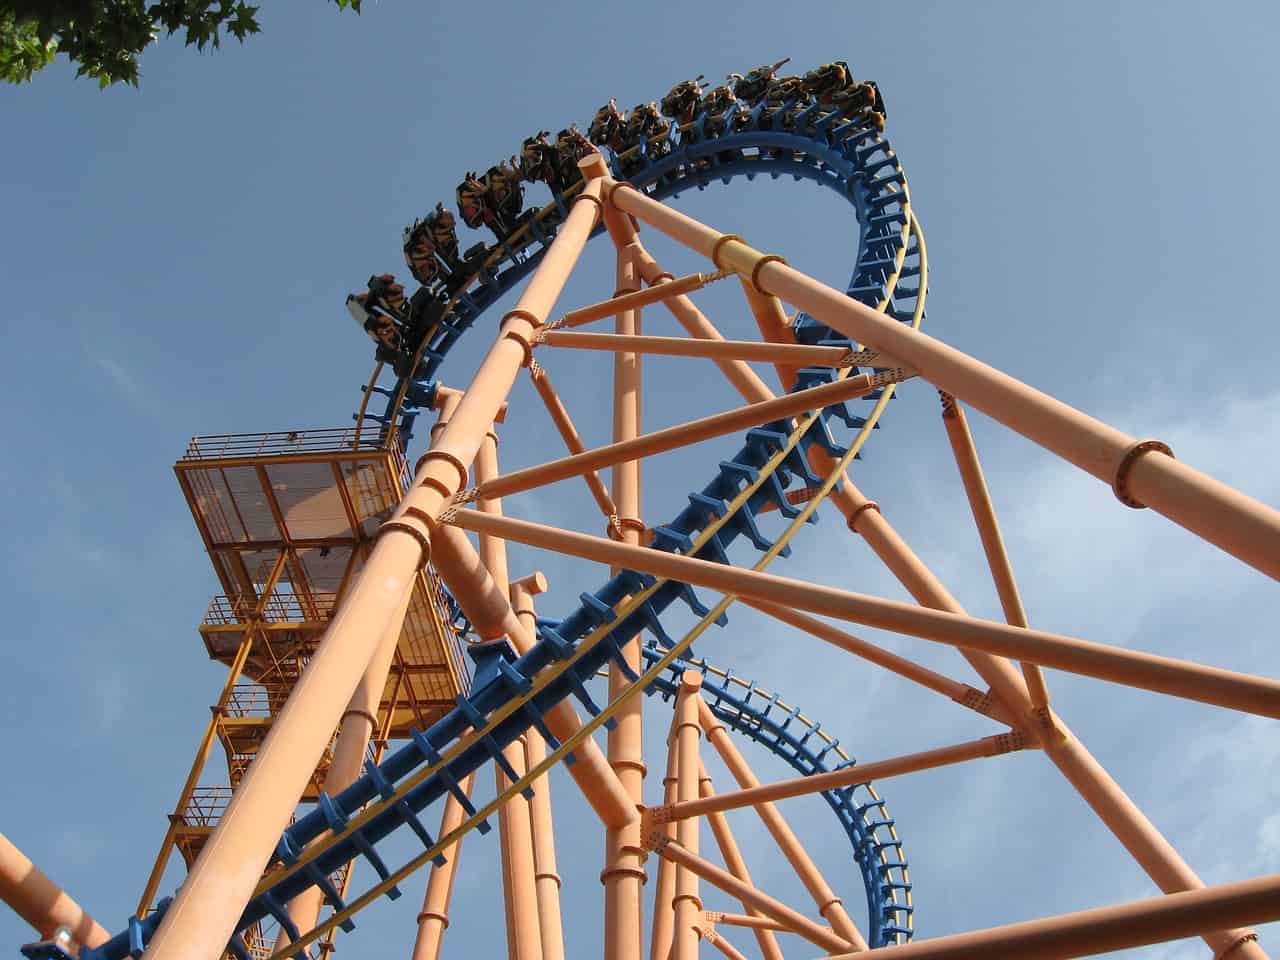 A rollercoaster at Parque Warner in Madrid. Image source: Pixabay user Adrian Maur.